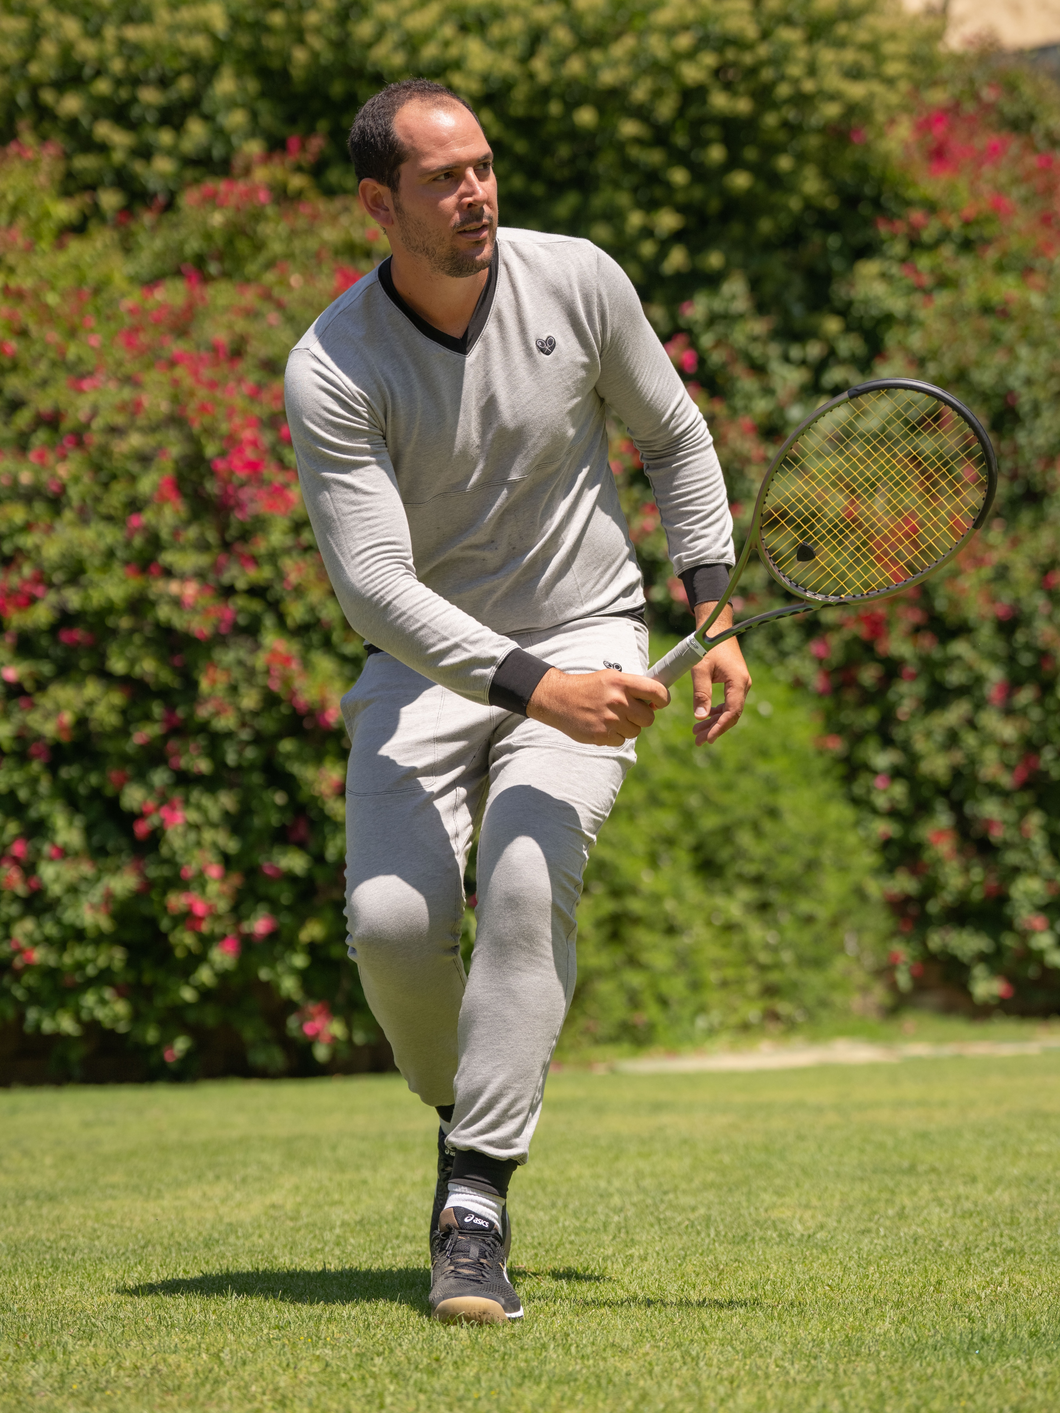 The Limited French Terry V-Neck Long Sleeve Black Tennis Shirt by Love Love Tennis is a premium sportswear piece that seamlessly combines style, comfort, and performance.